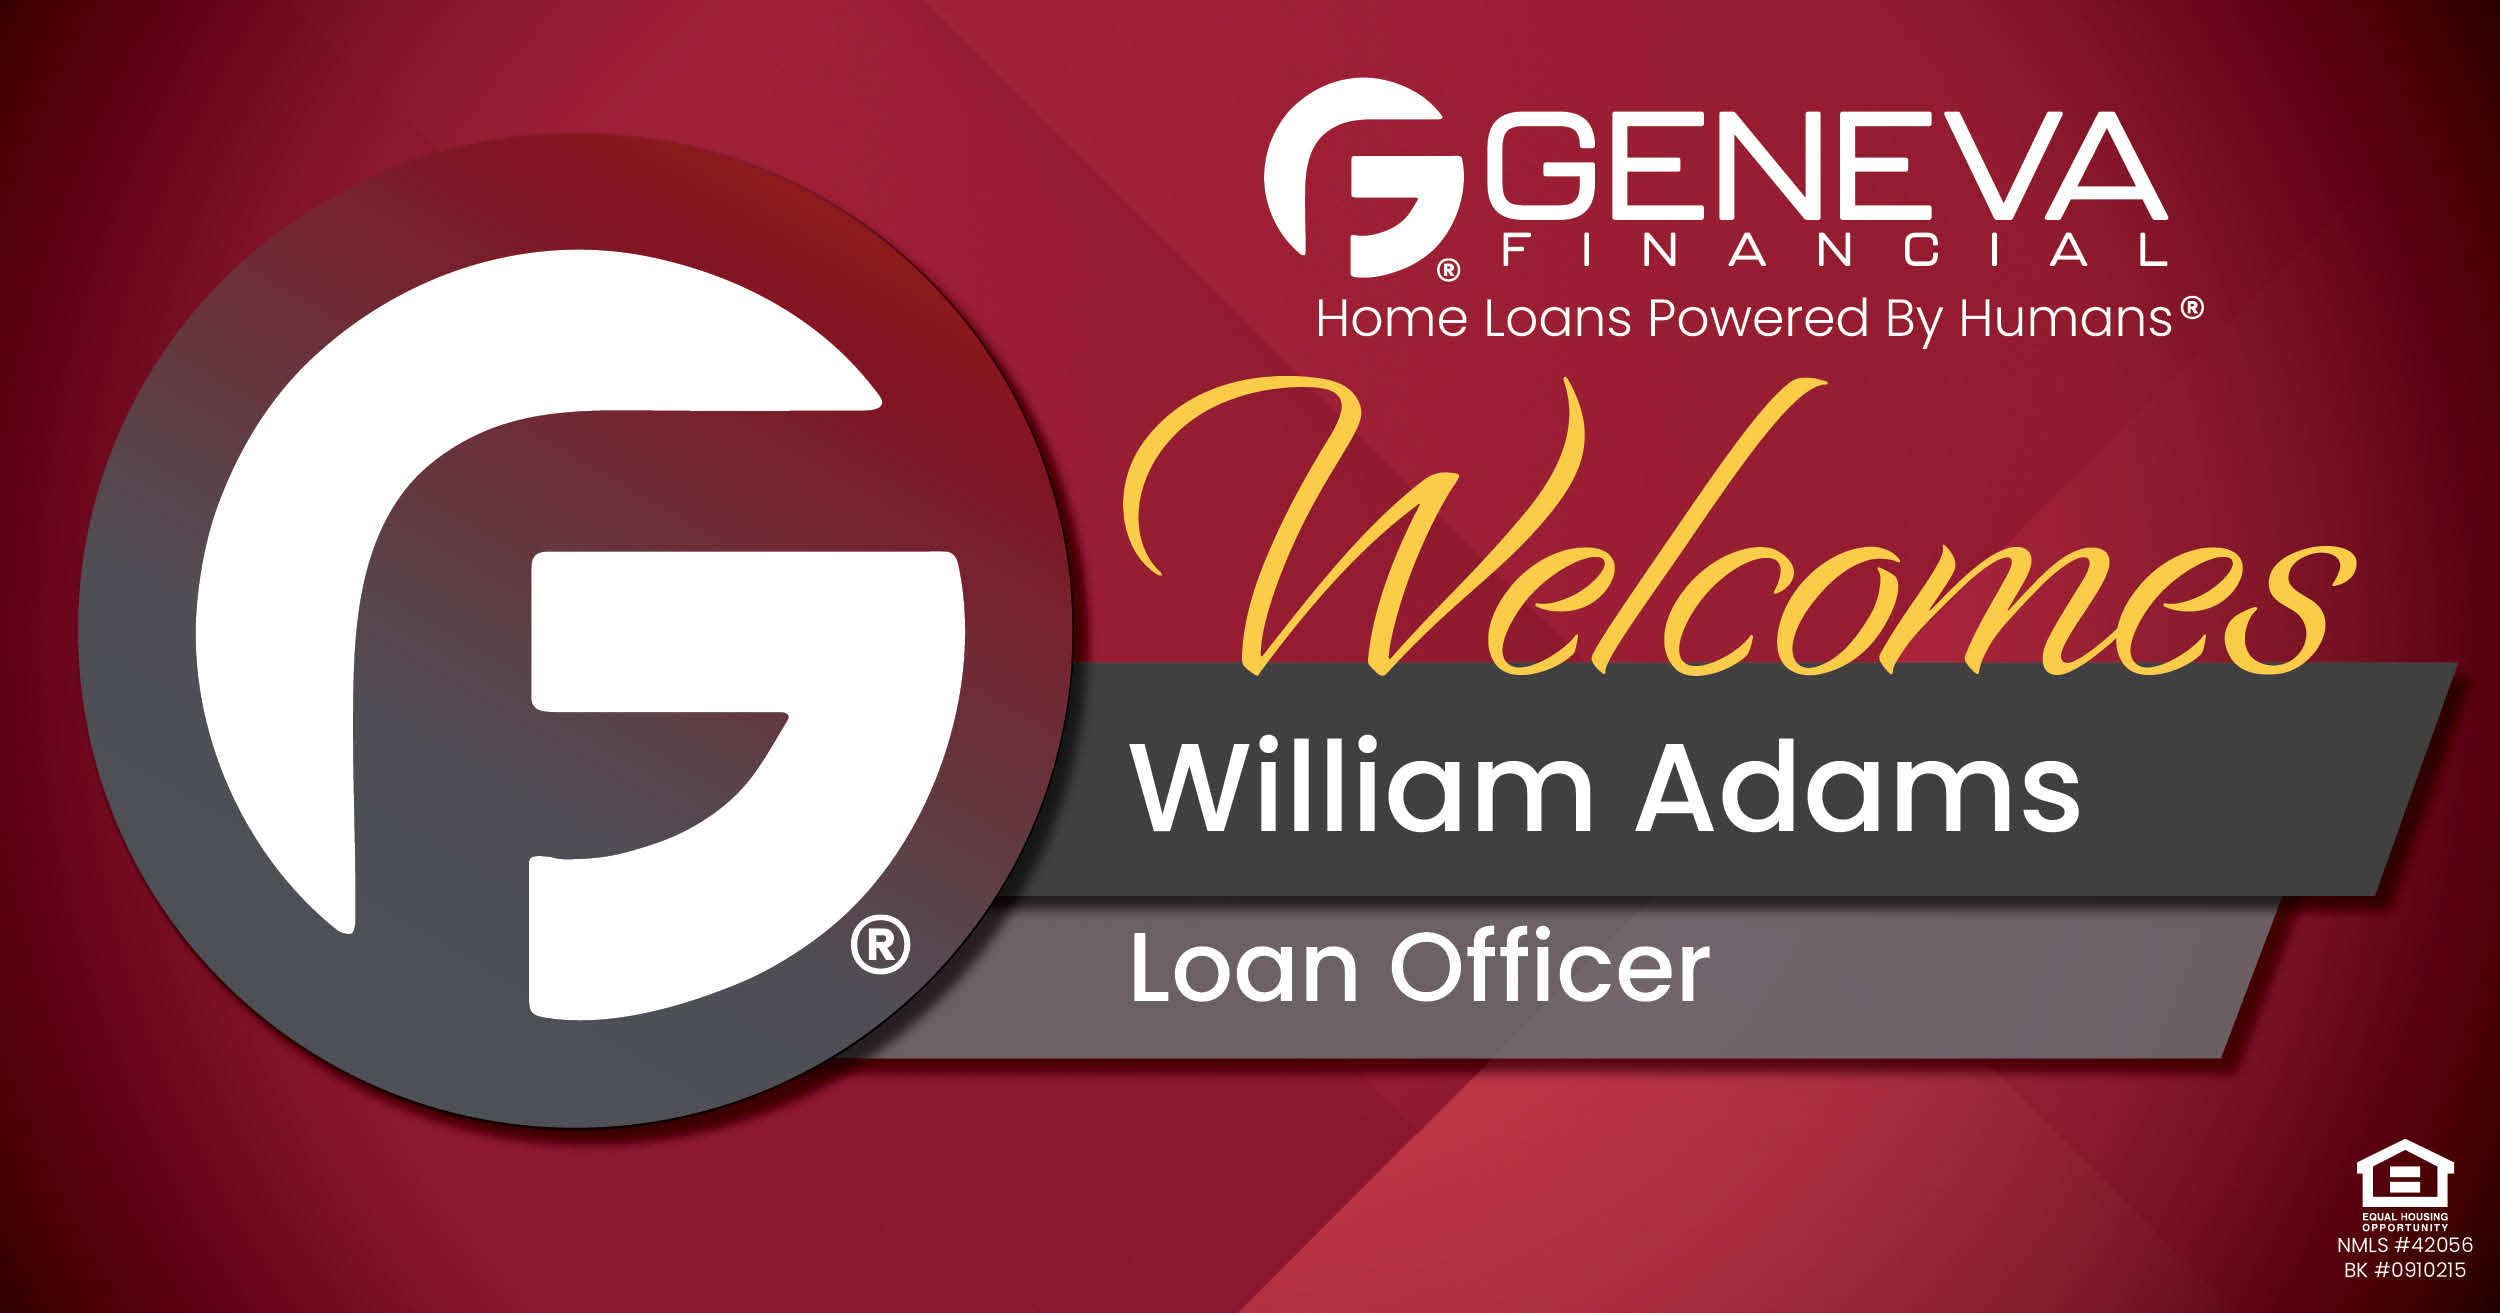 Geneva Financial Welcomes New Loan Officer William Adams to Las Vegas, Nevada – Home Loans Powered by Humans®.